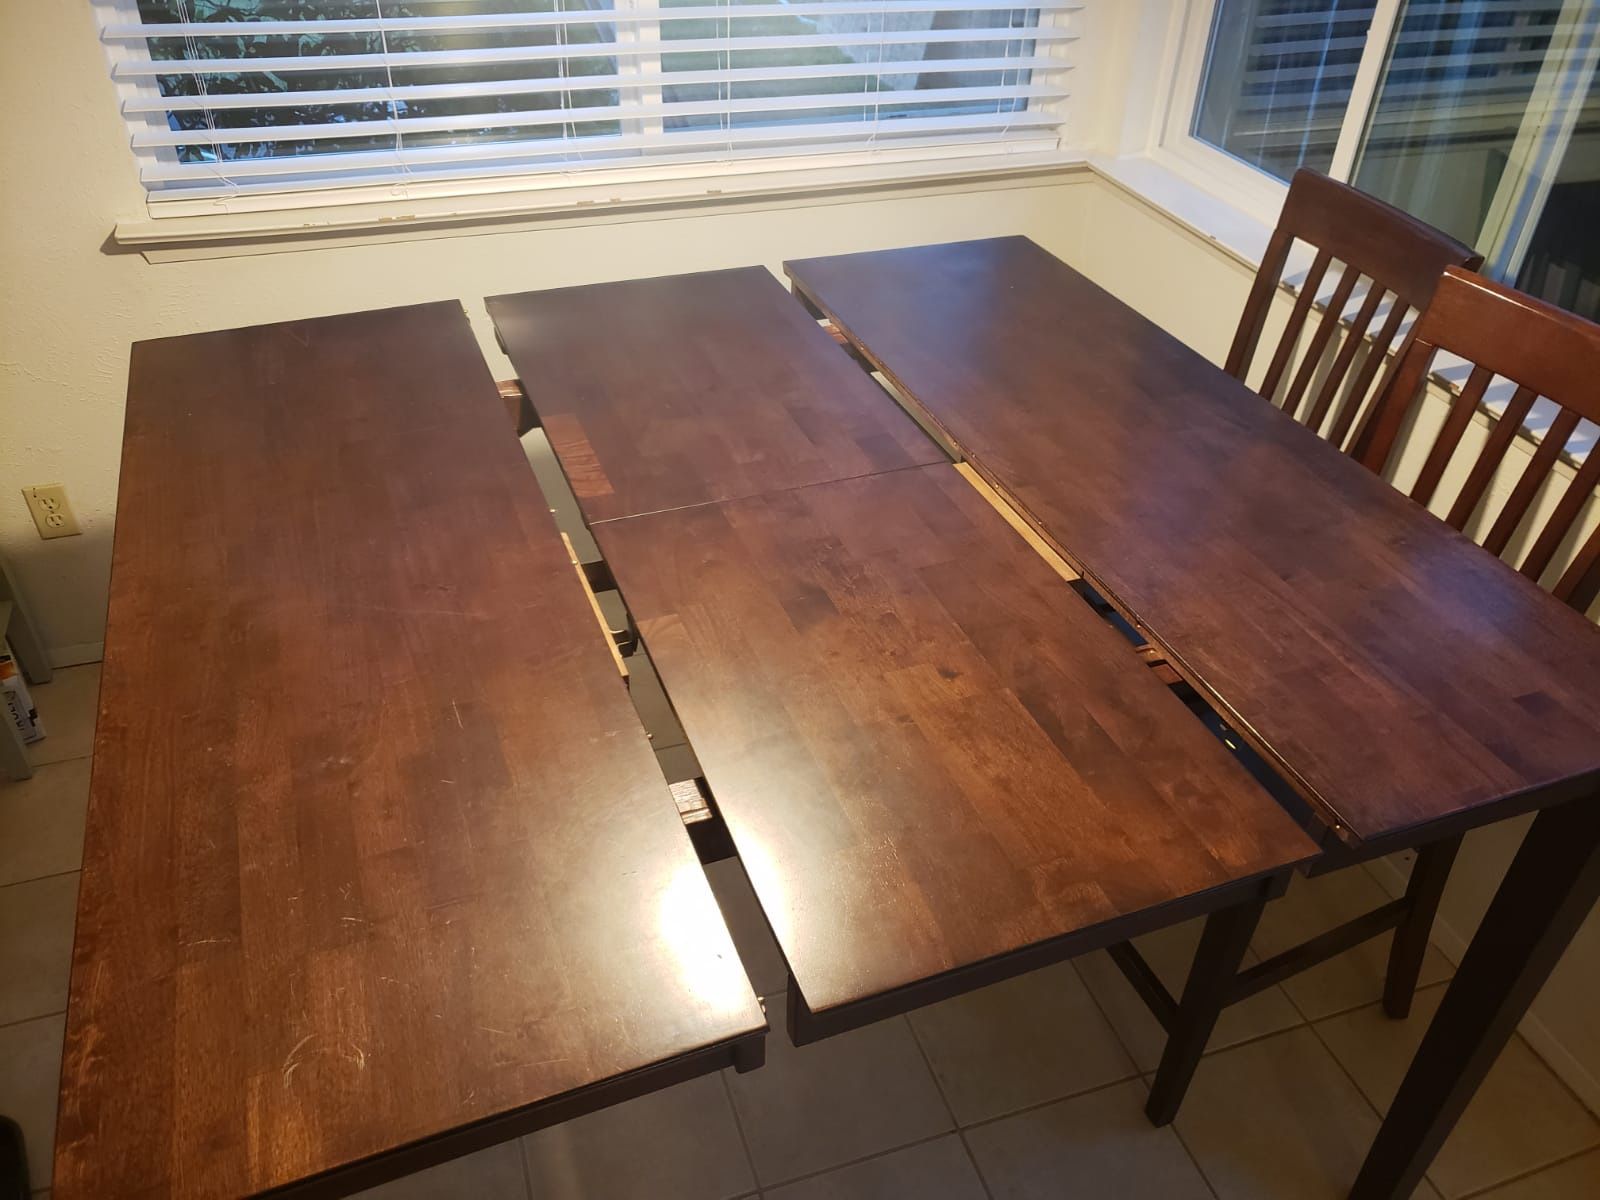 Expanding Rectangular wood table with chairs